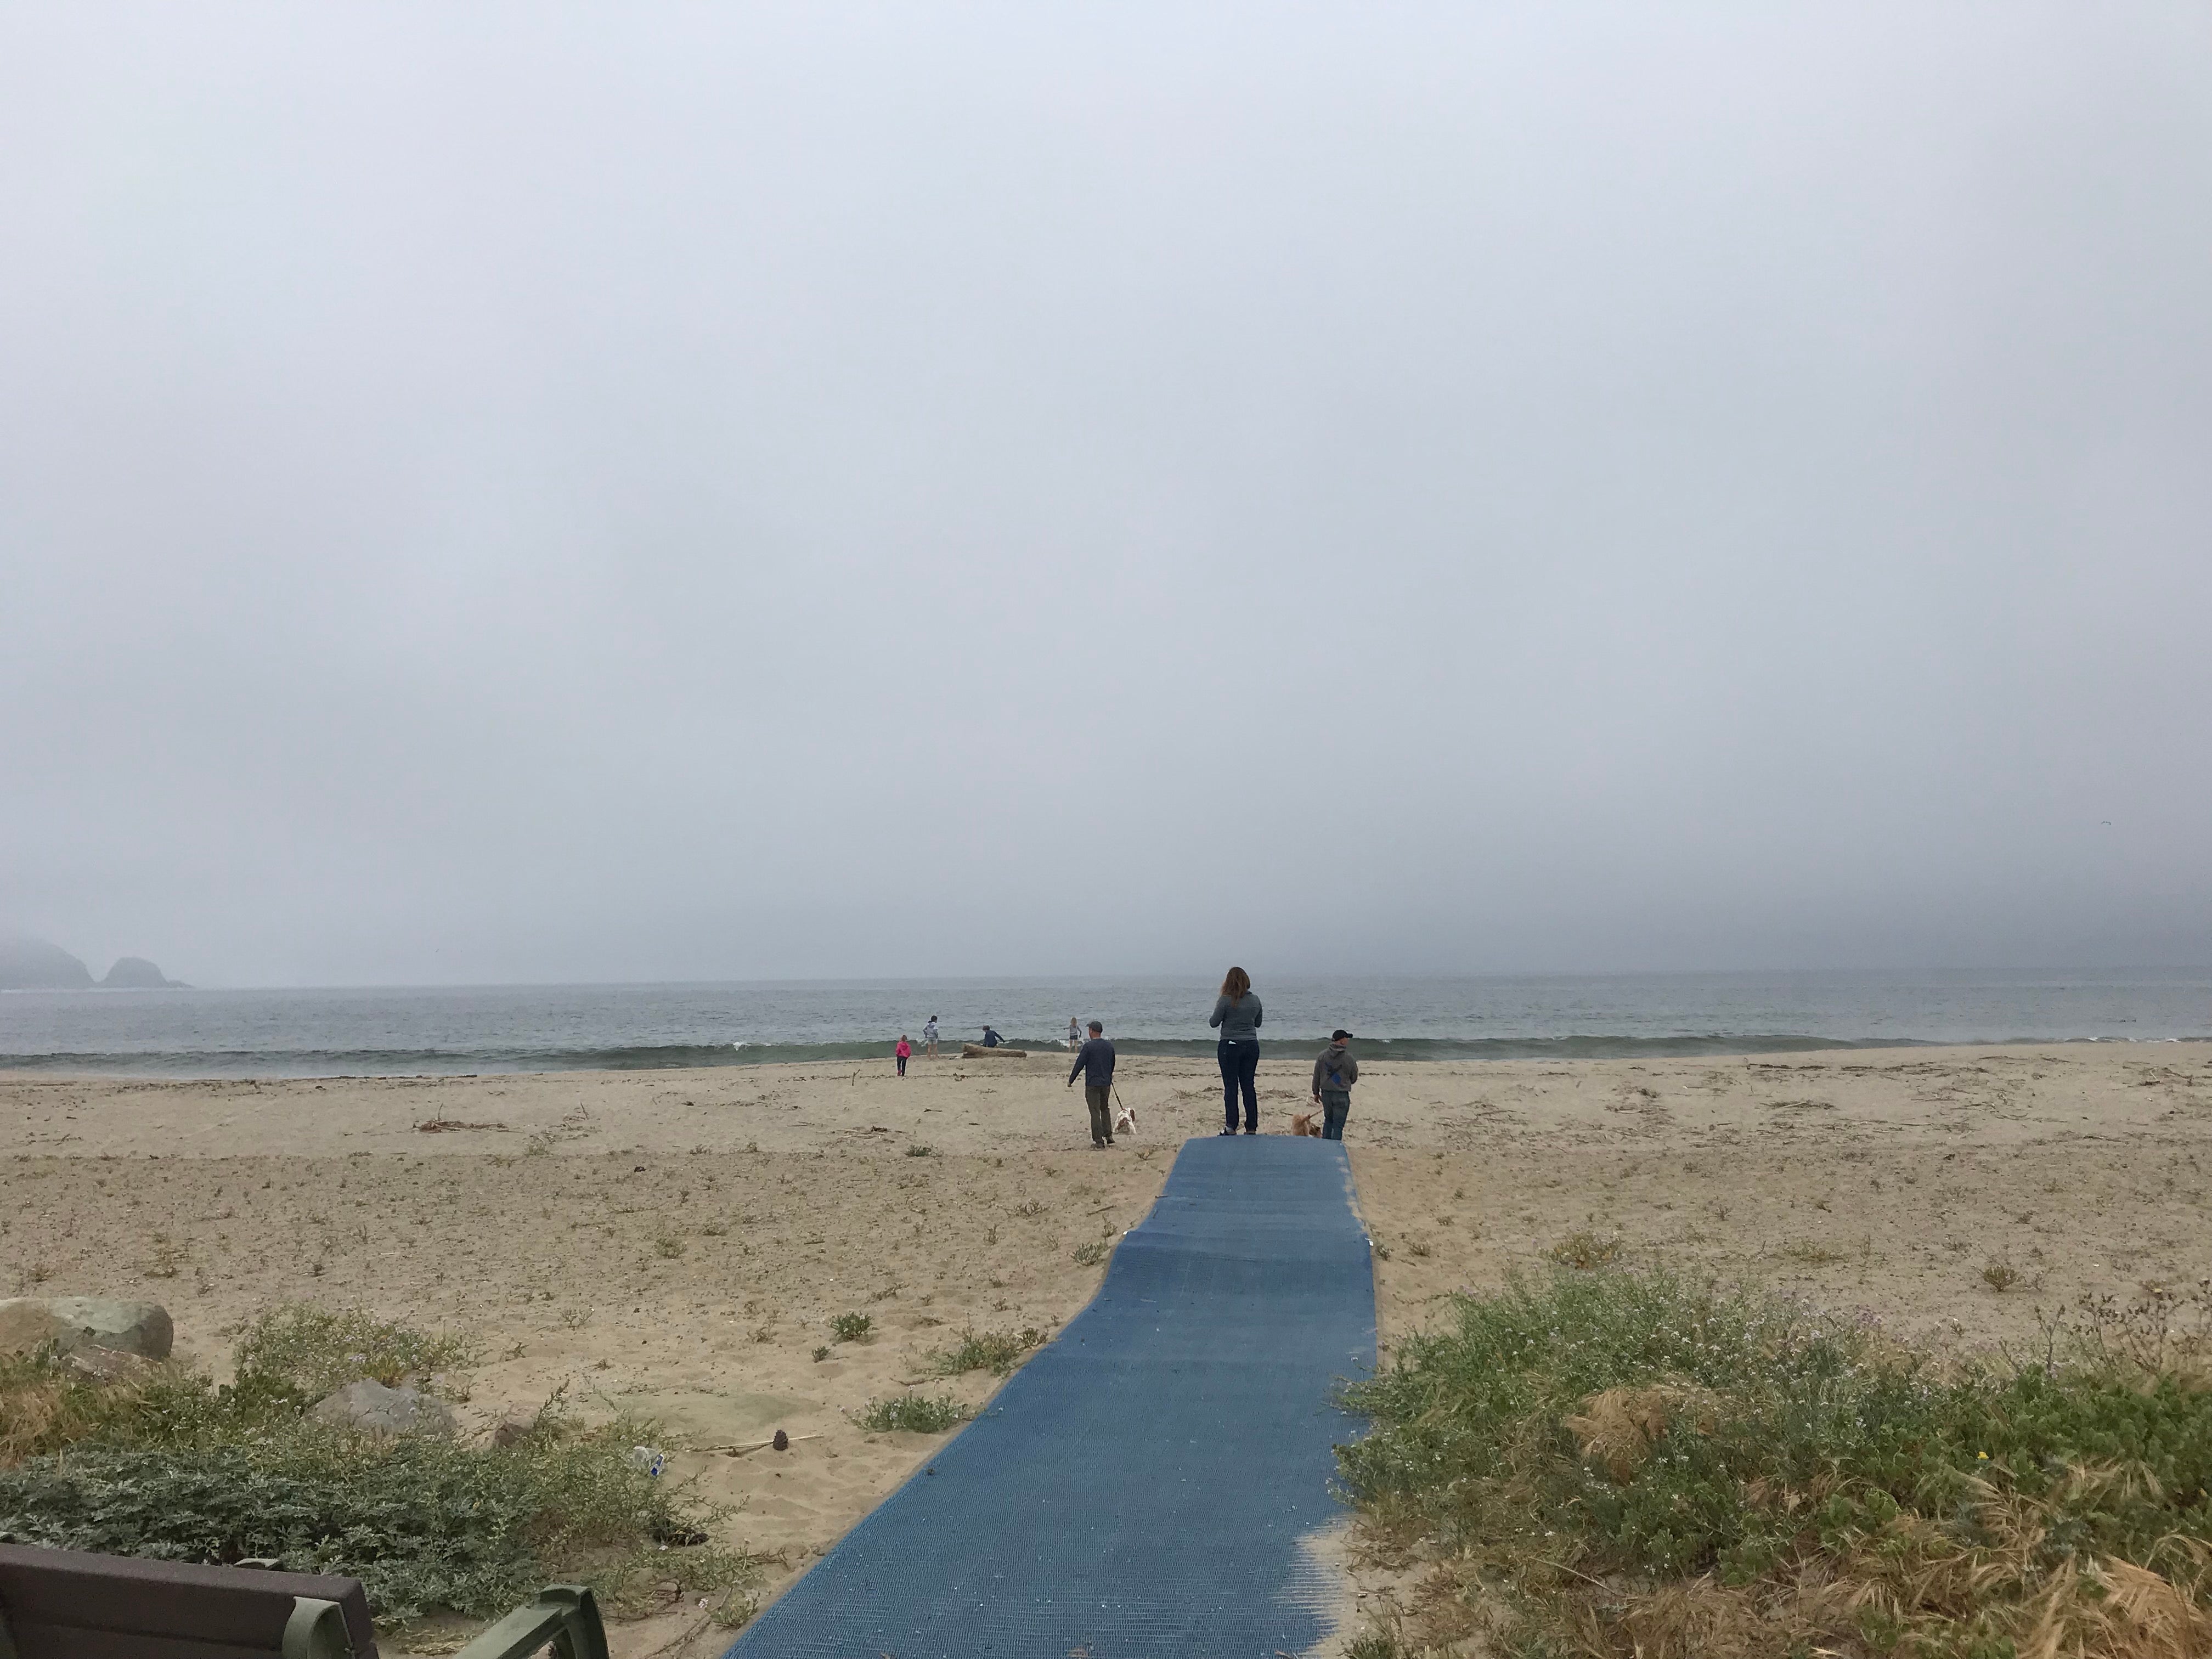 A little overcast but had the beach to ourselves.